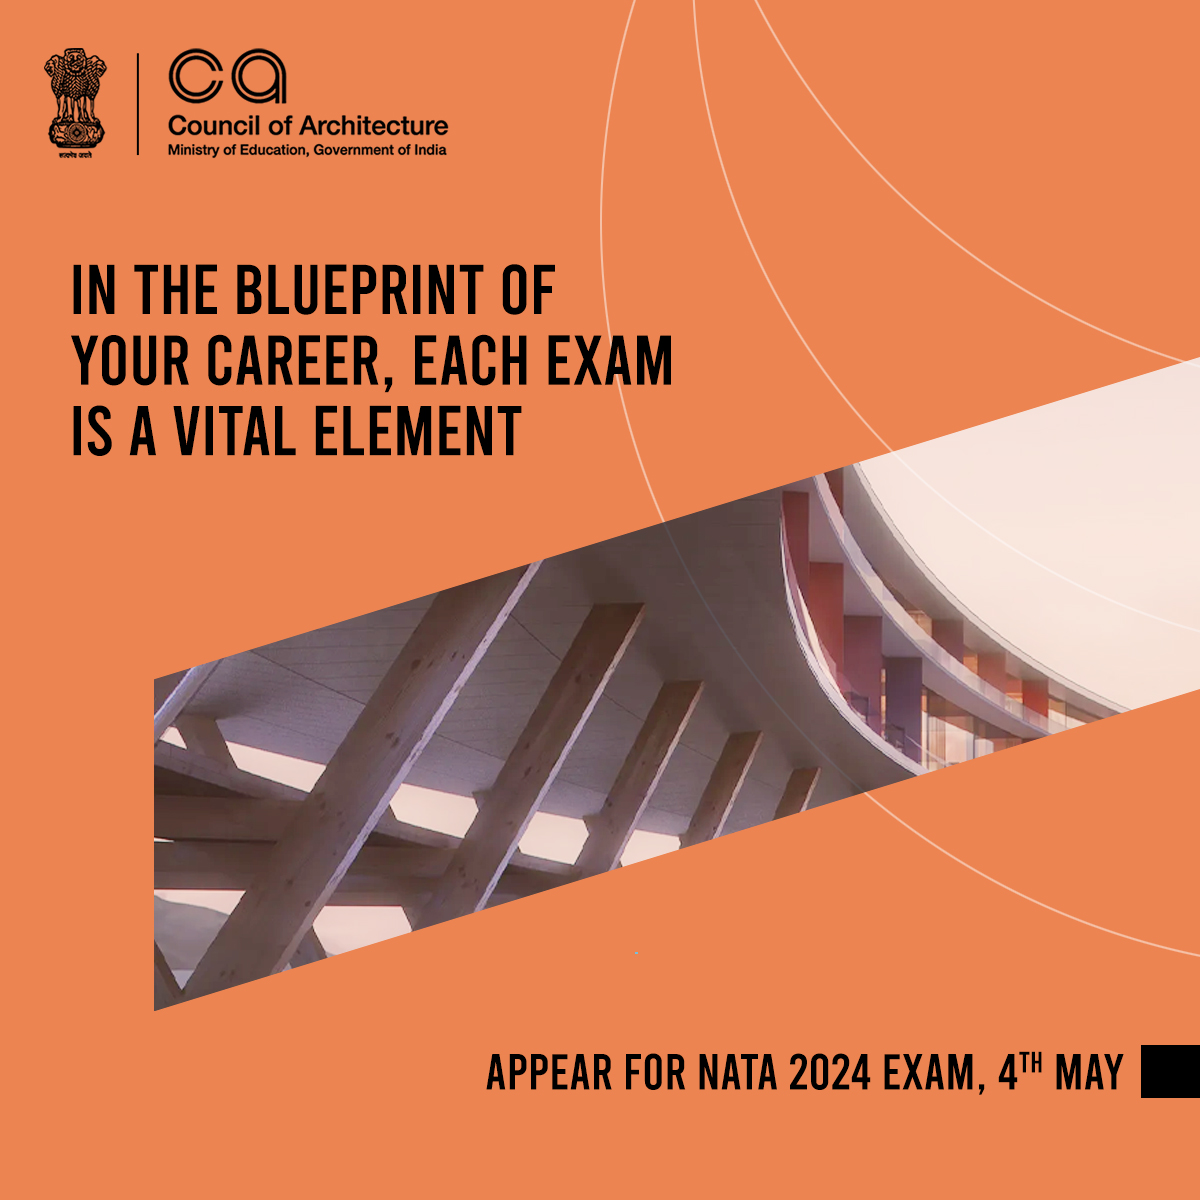 NATA Exam Day!⏰
The wait is over, aspiring architects!  Today is your chance to shine on the NATA exam.  Feeling confident and prepped?  Let us know in the comments below! 
  
#NATAExamDay #FutureArchitects #TimeToShine #creativecareers #architecture #councilofarchitecture